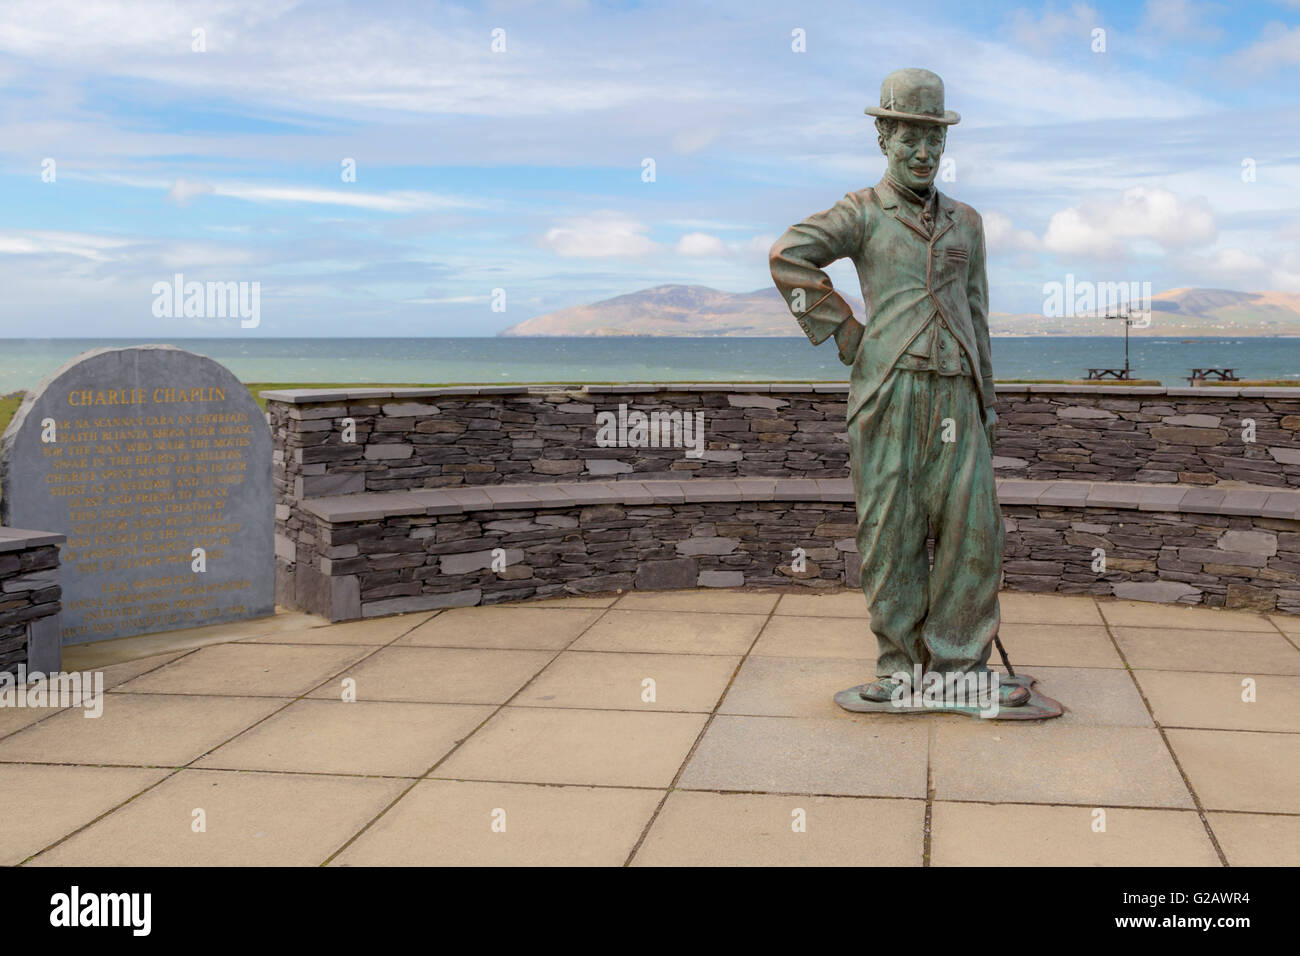 Statue of Charlie Chaplin in Waterville, on the Ring of Kerry, Iveragh Peninsula, North Atlantic Ocean, County Kerry, Ireland. Stock Photo